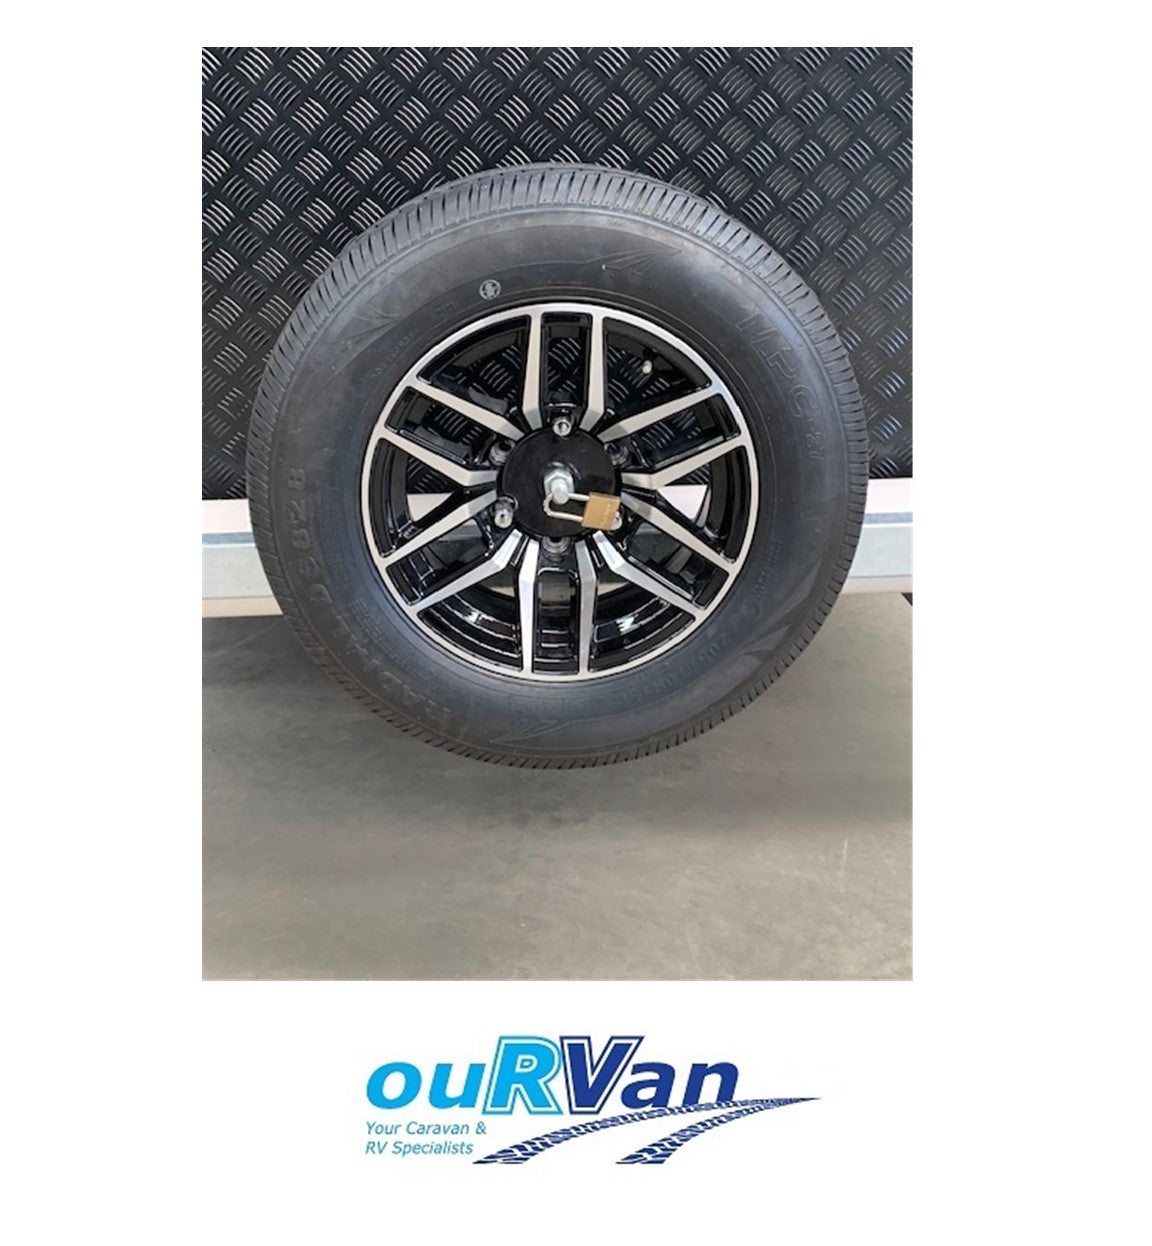 Caravan Spare Tyre Wheel Cover With Logo Suit Tyre 205/70/15